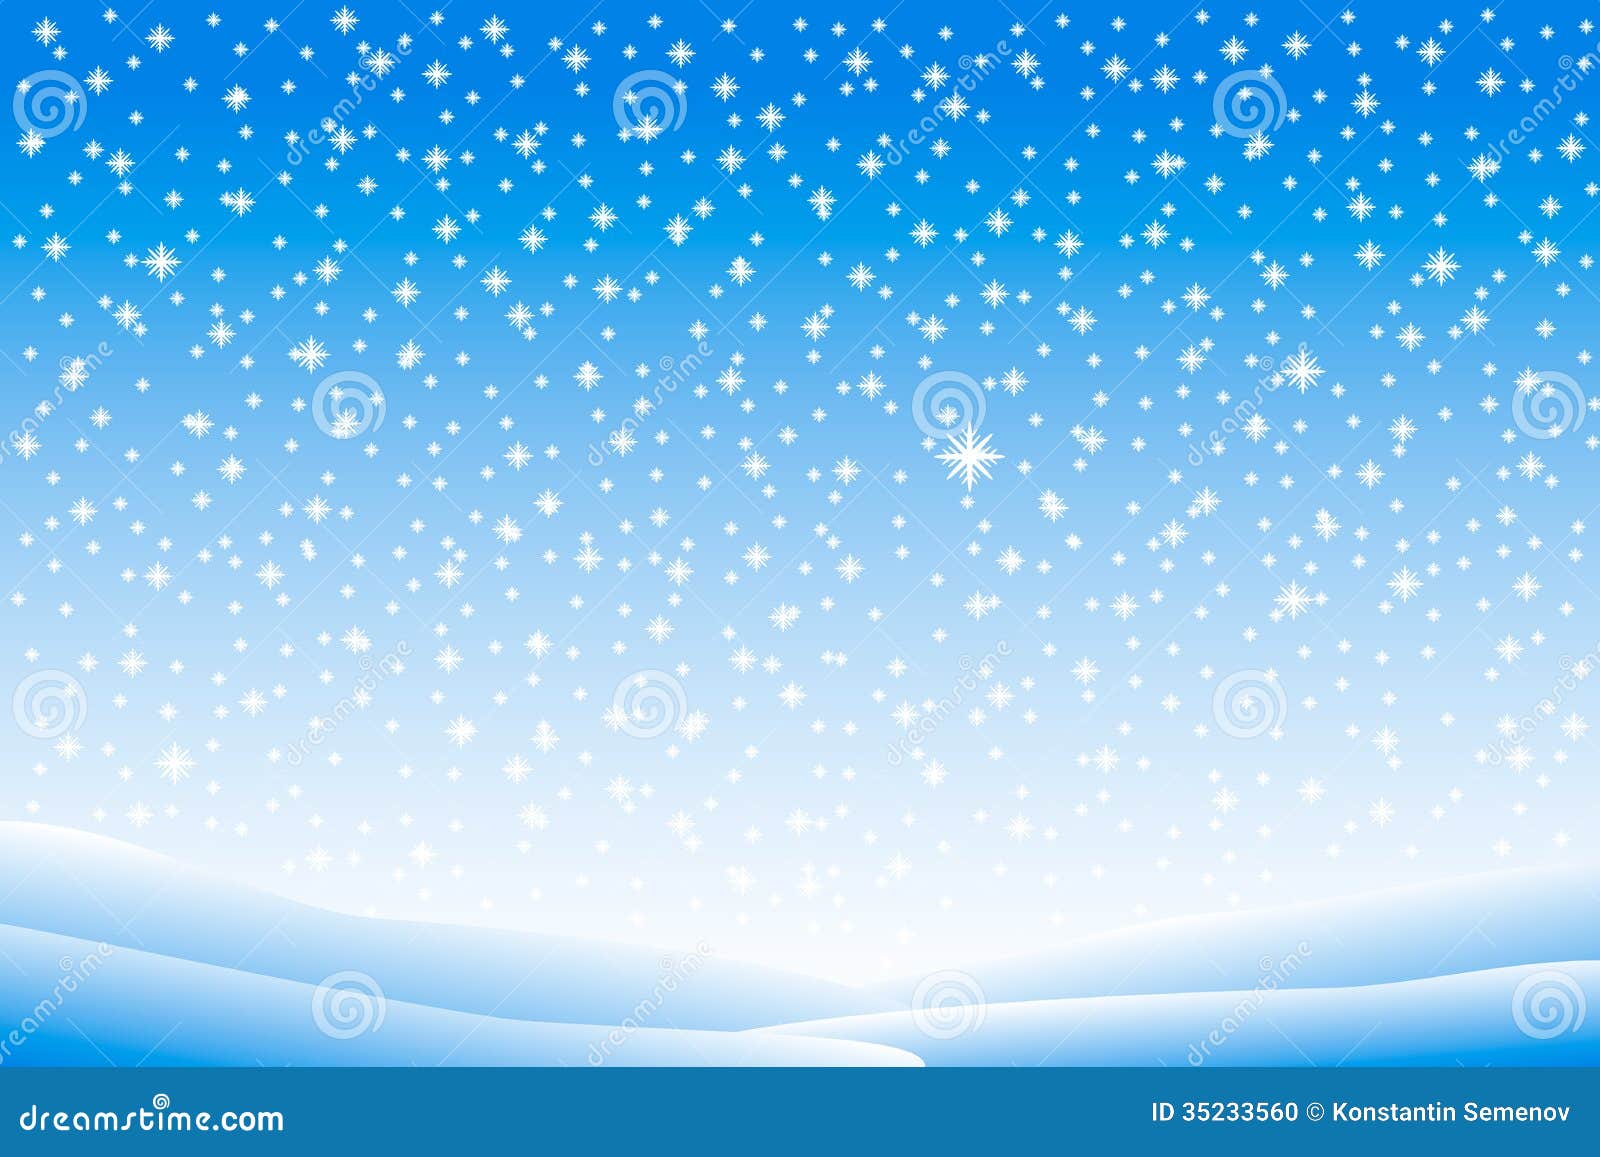 clipart snow falling - photo #24